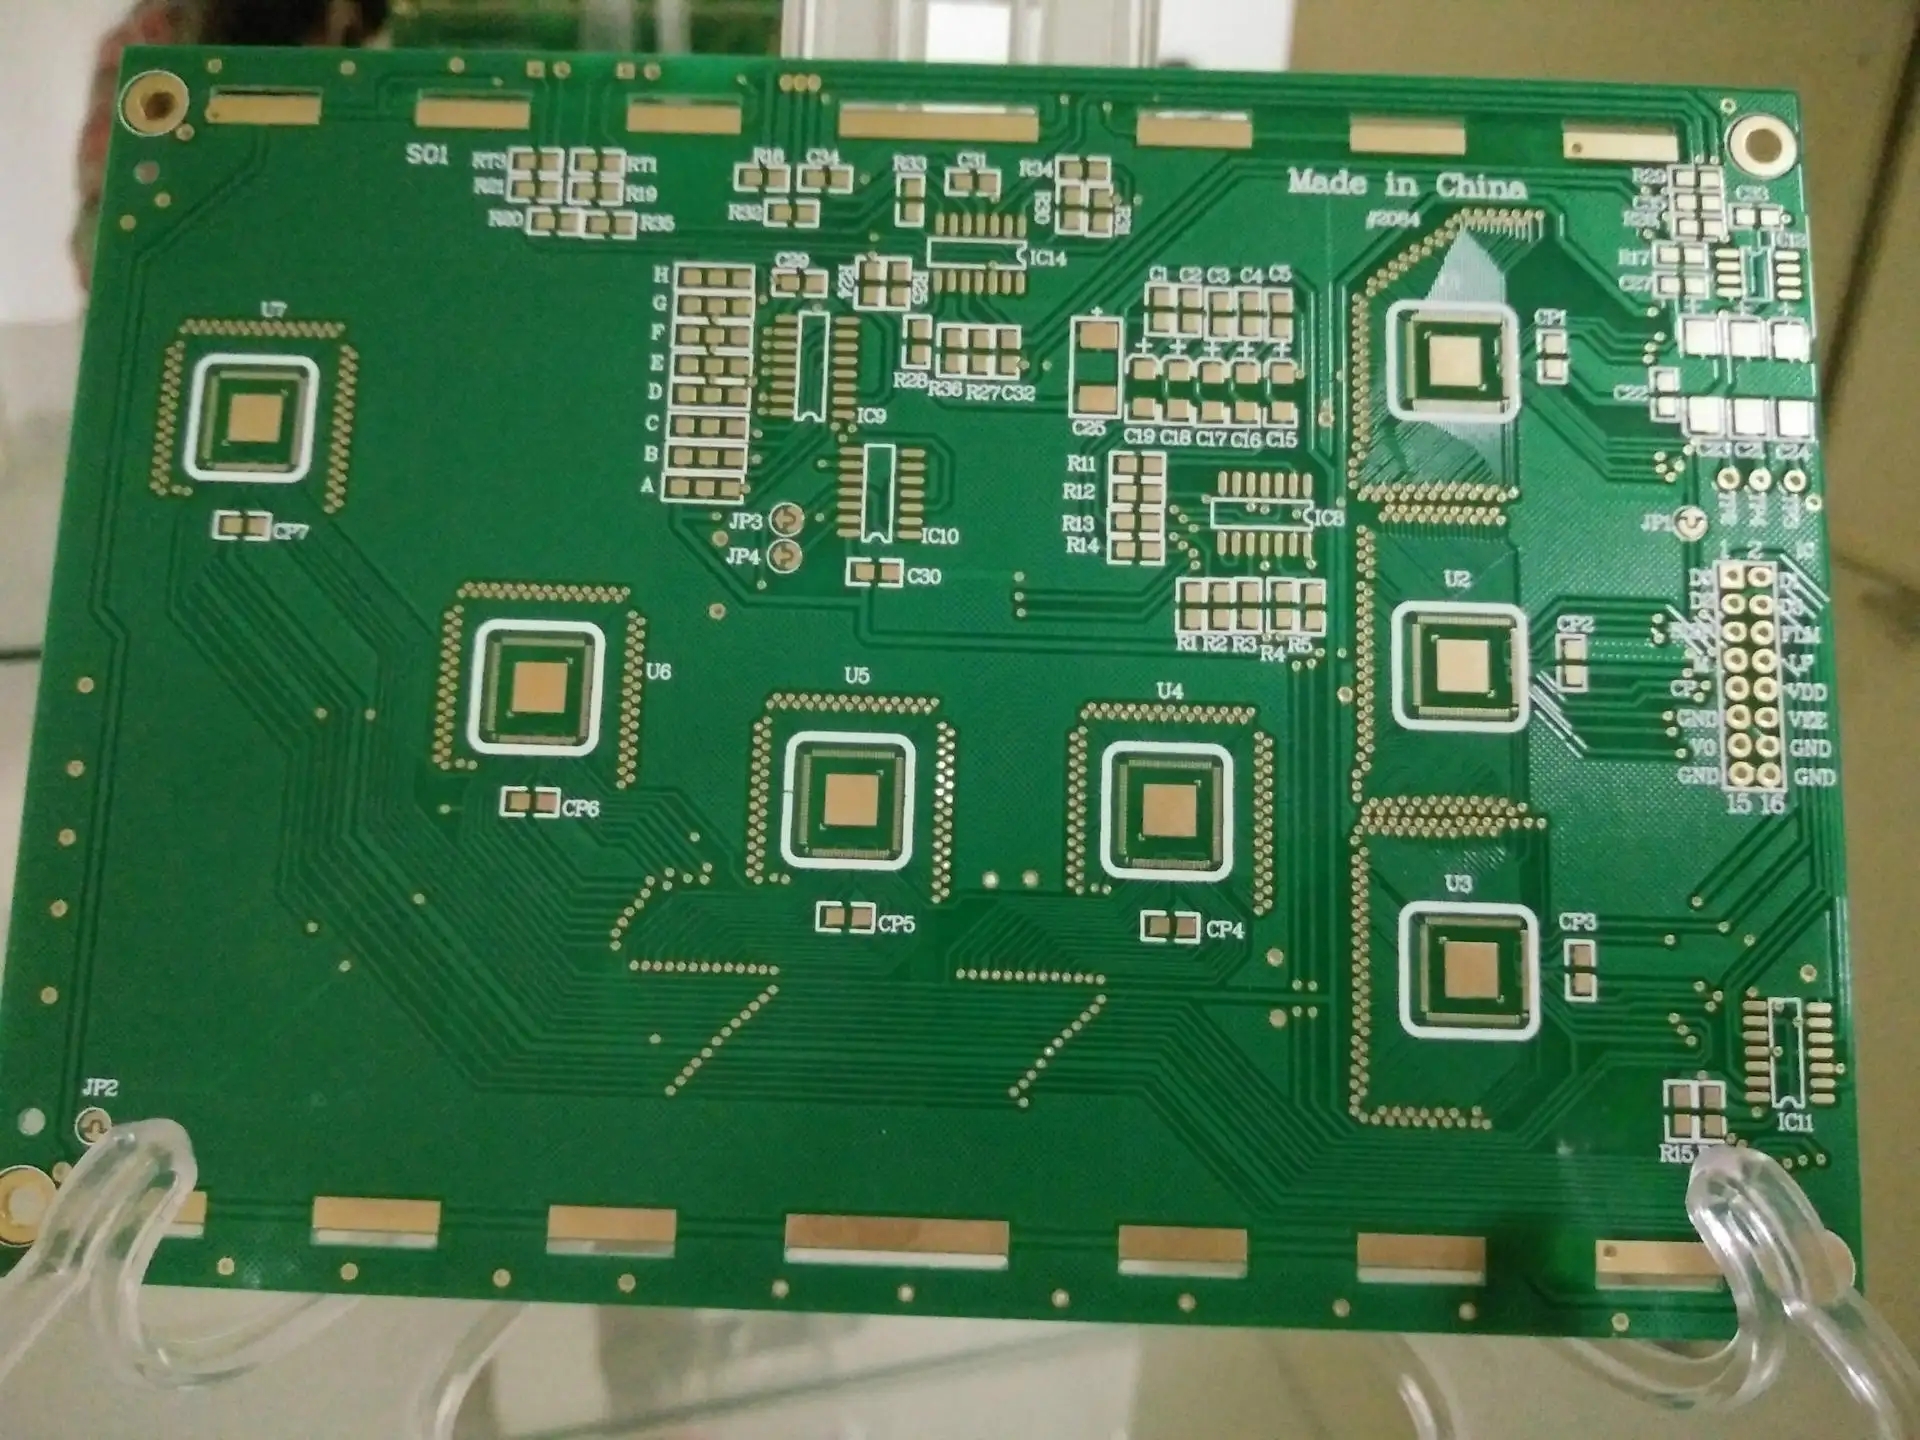 Mistaken Ideas, Background and Development History of PCB Copying